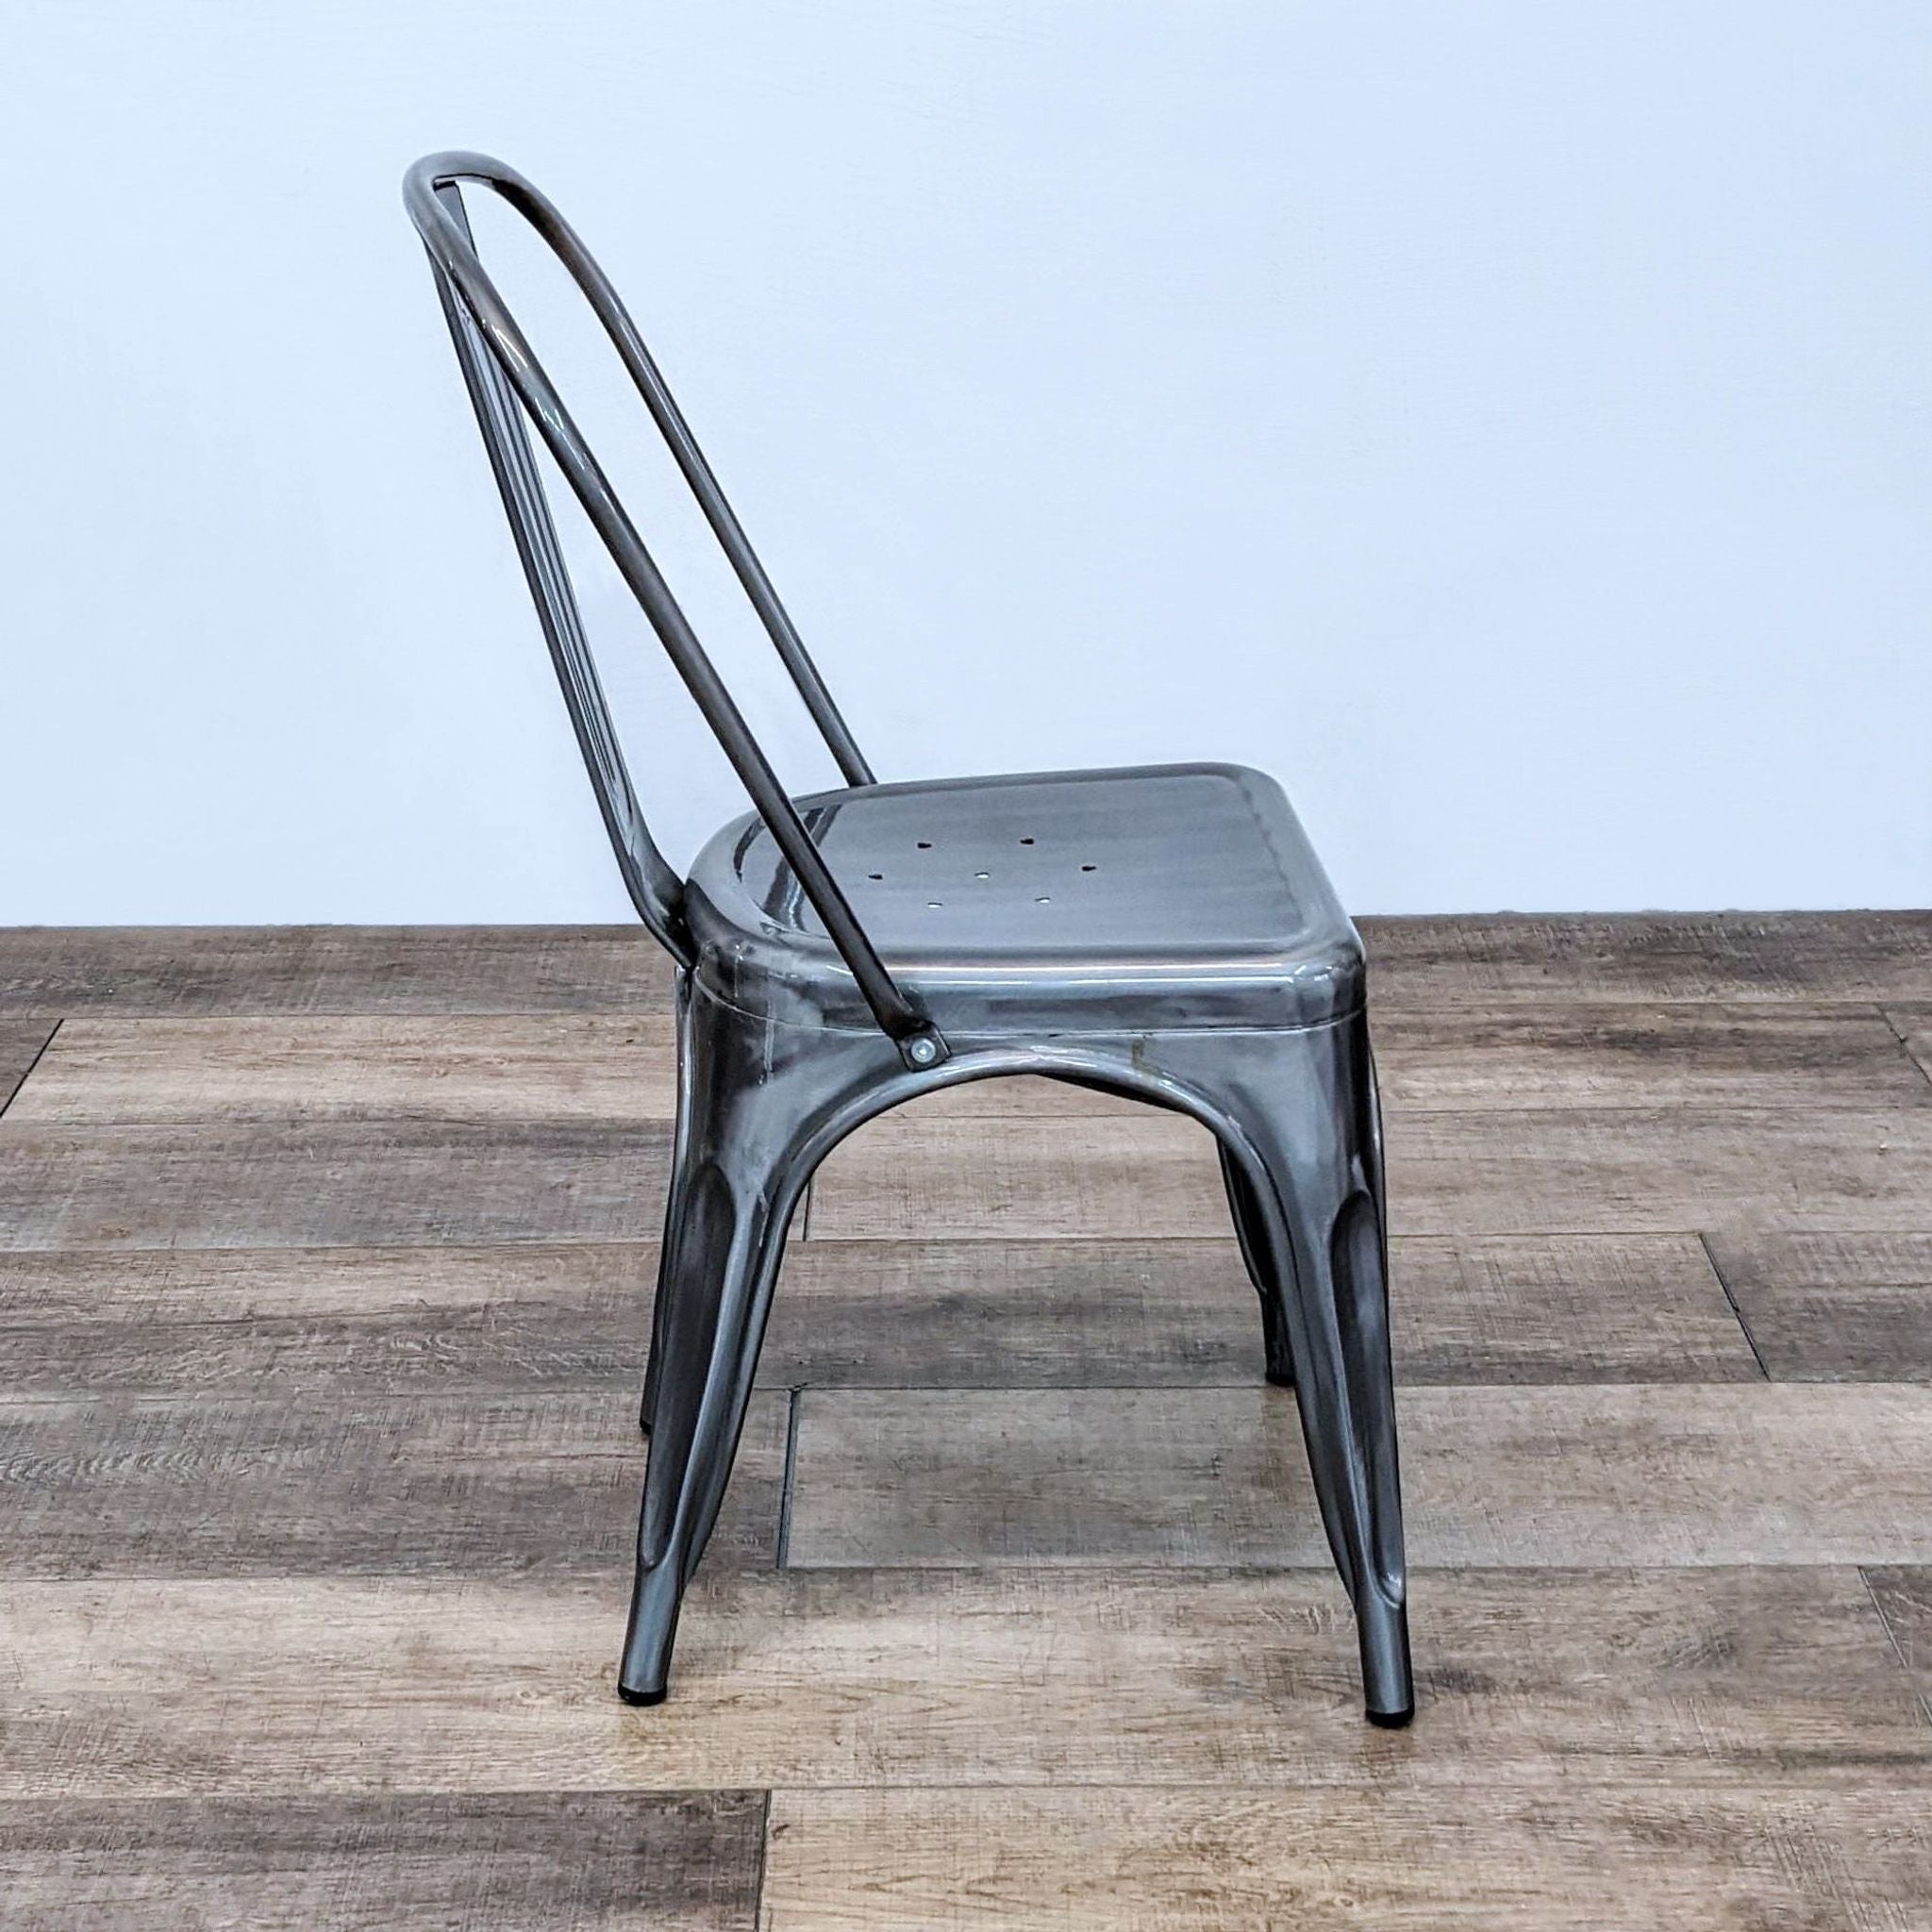 Stackable Reperch industrial dining chair, metal construction, compact and lightweight, shown from an angle.